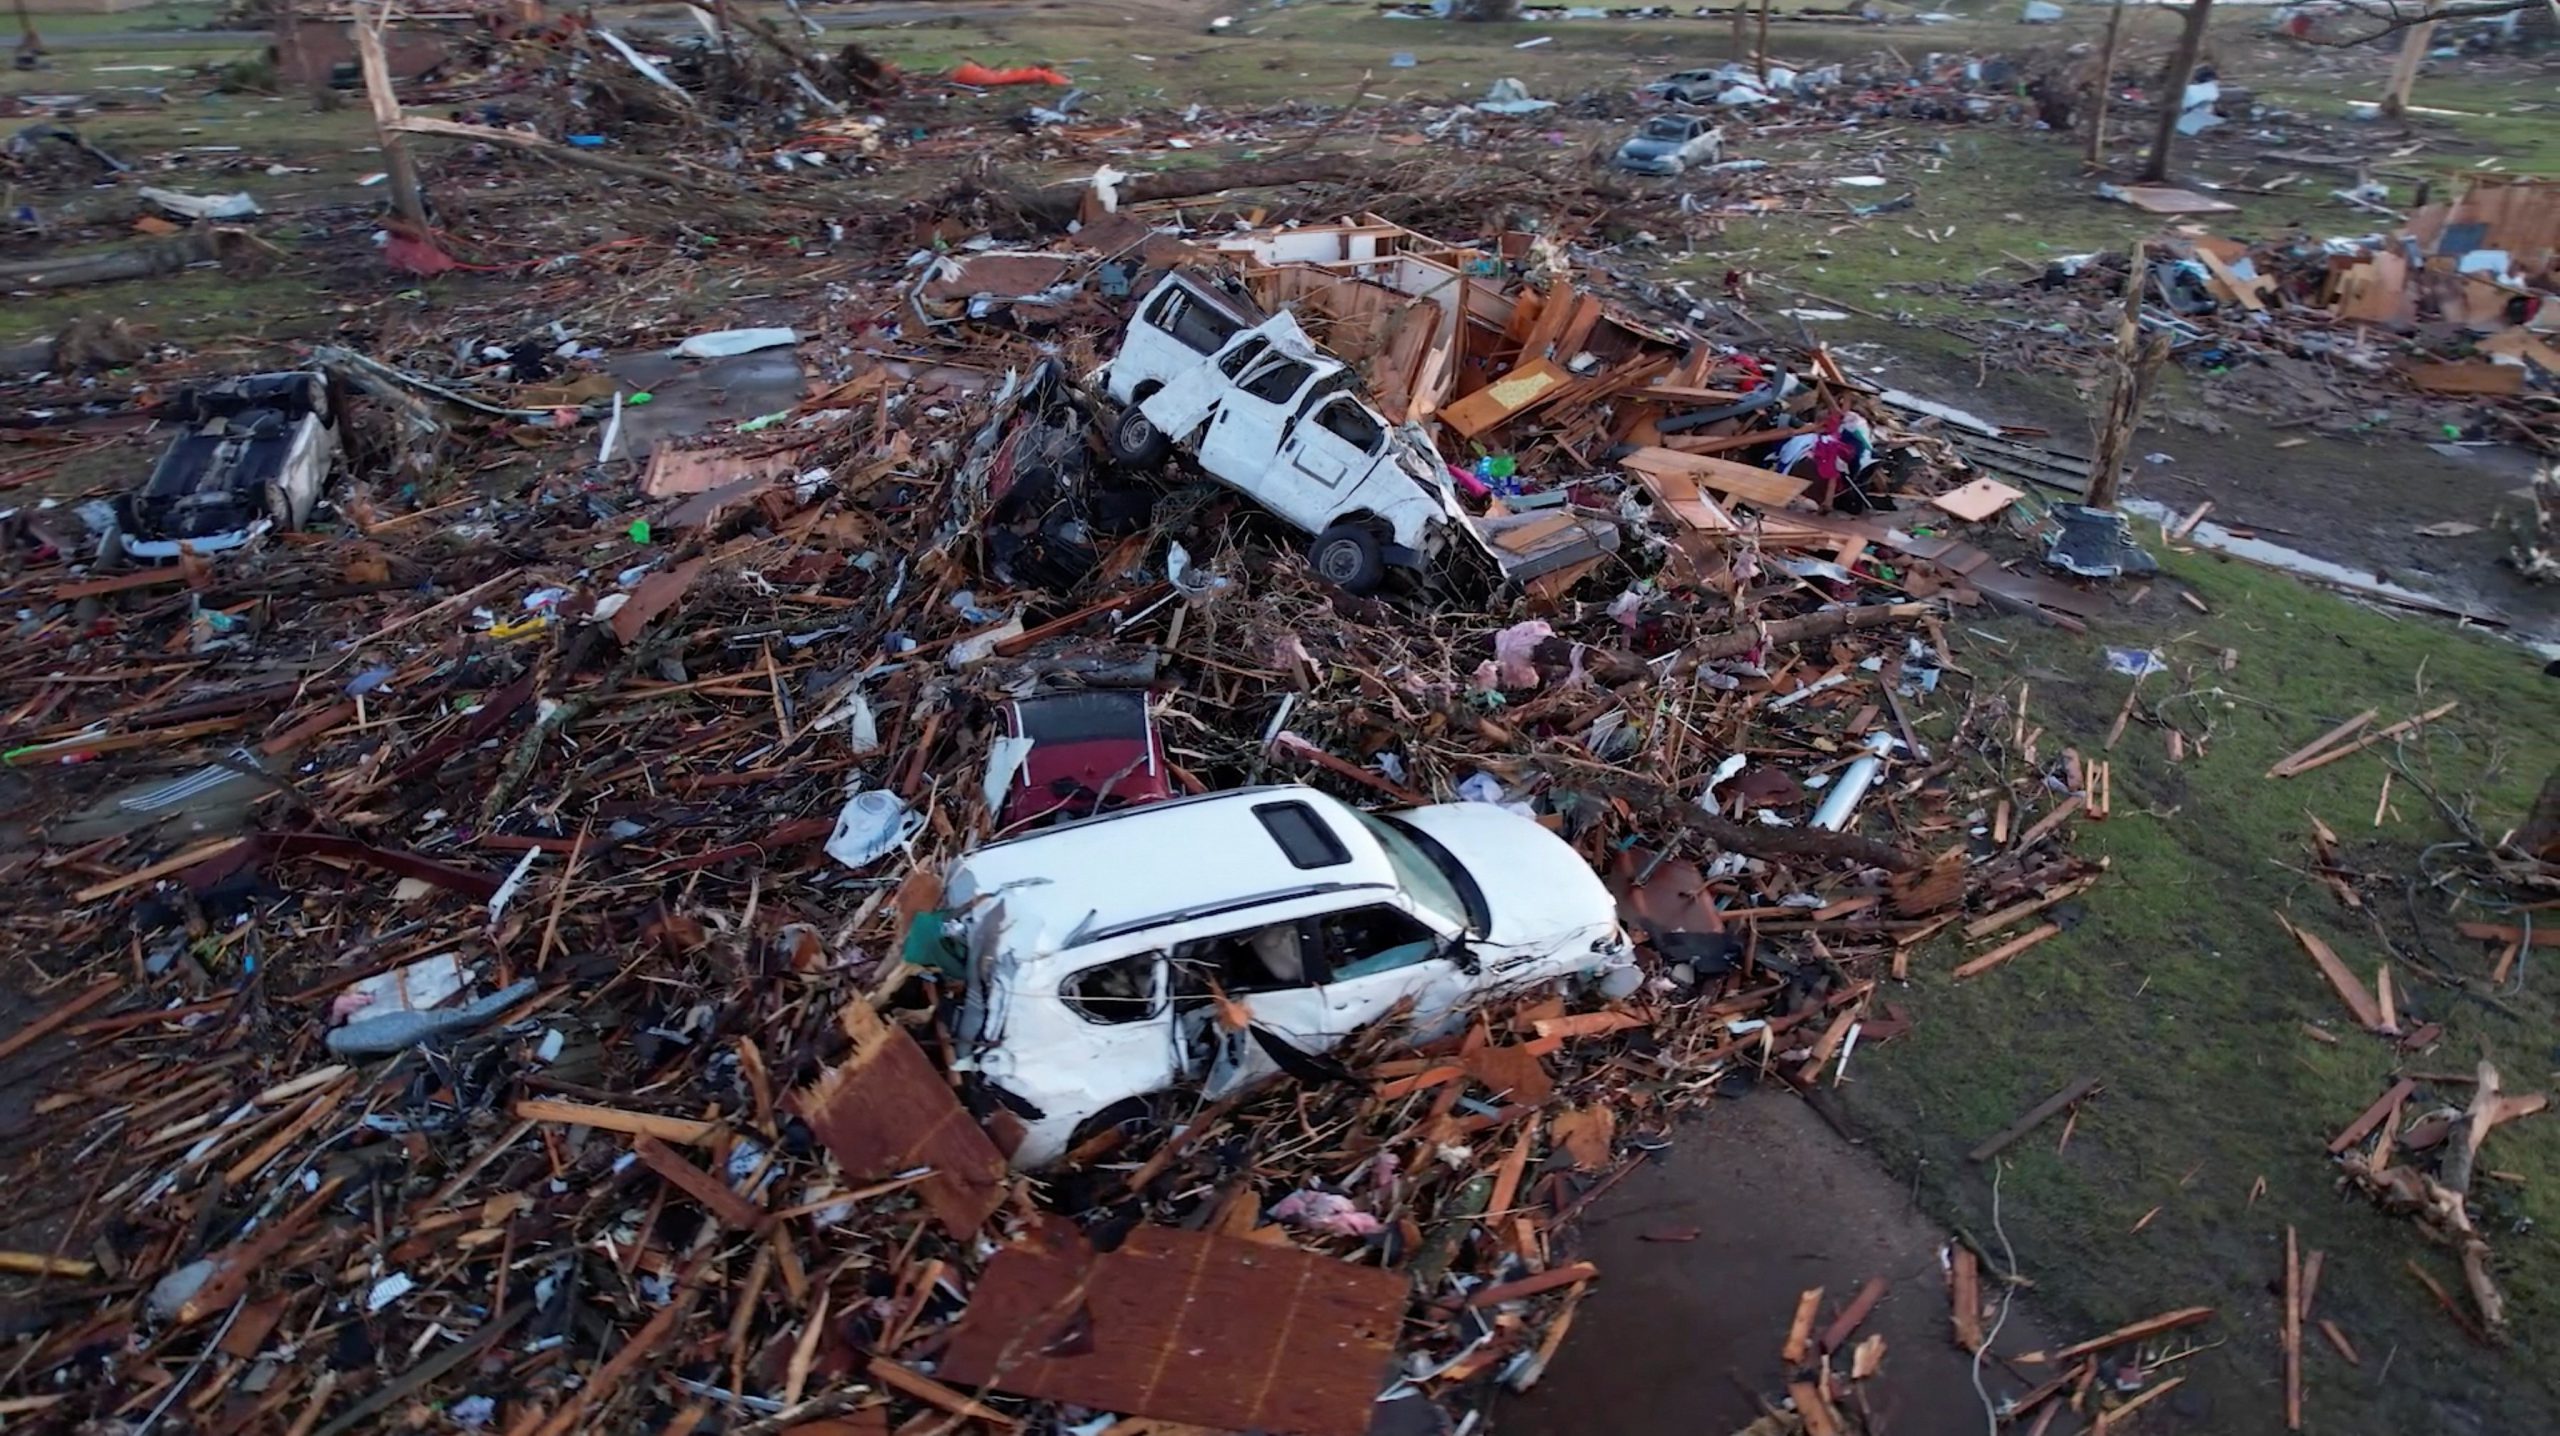 An aerial view of the aftermath of a tornado, in Rolling Fork, Mississippi, U.S. March 25, 2023 in this screengrab obtained from a video. Dozens are dead or injured after a least one powerful tornado tore through rural Mississippi March 24. (OSV News photo/SevereStudios.com, Jordan Hall via Reuters)